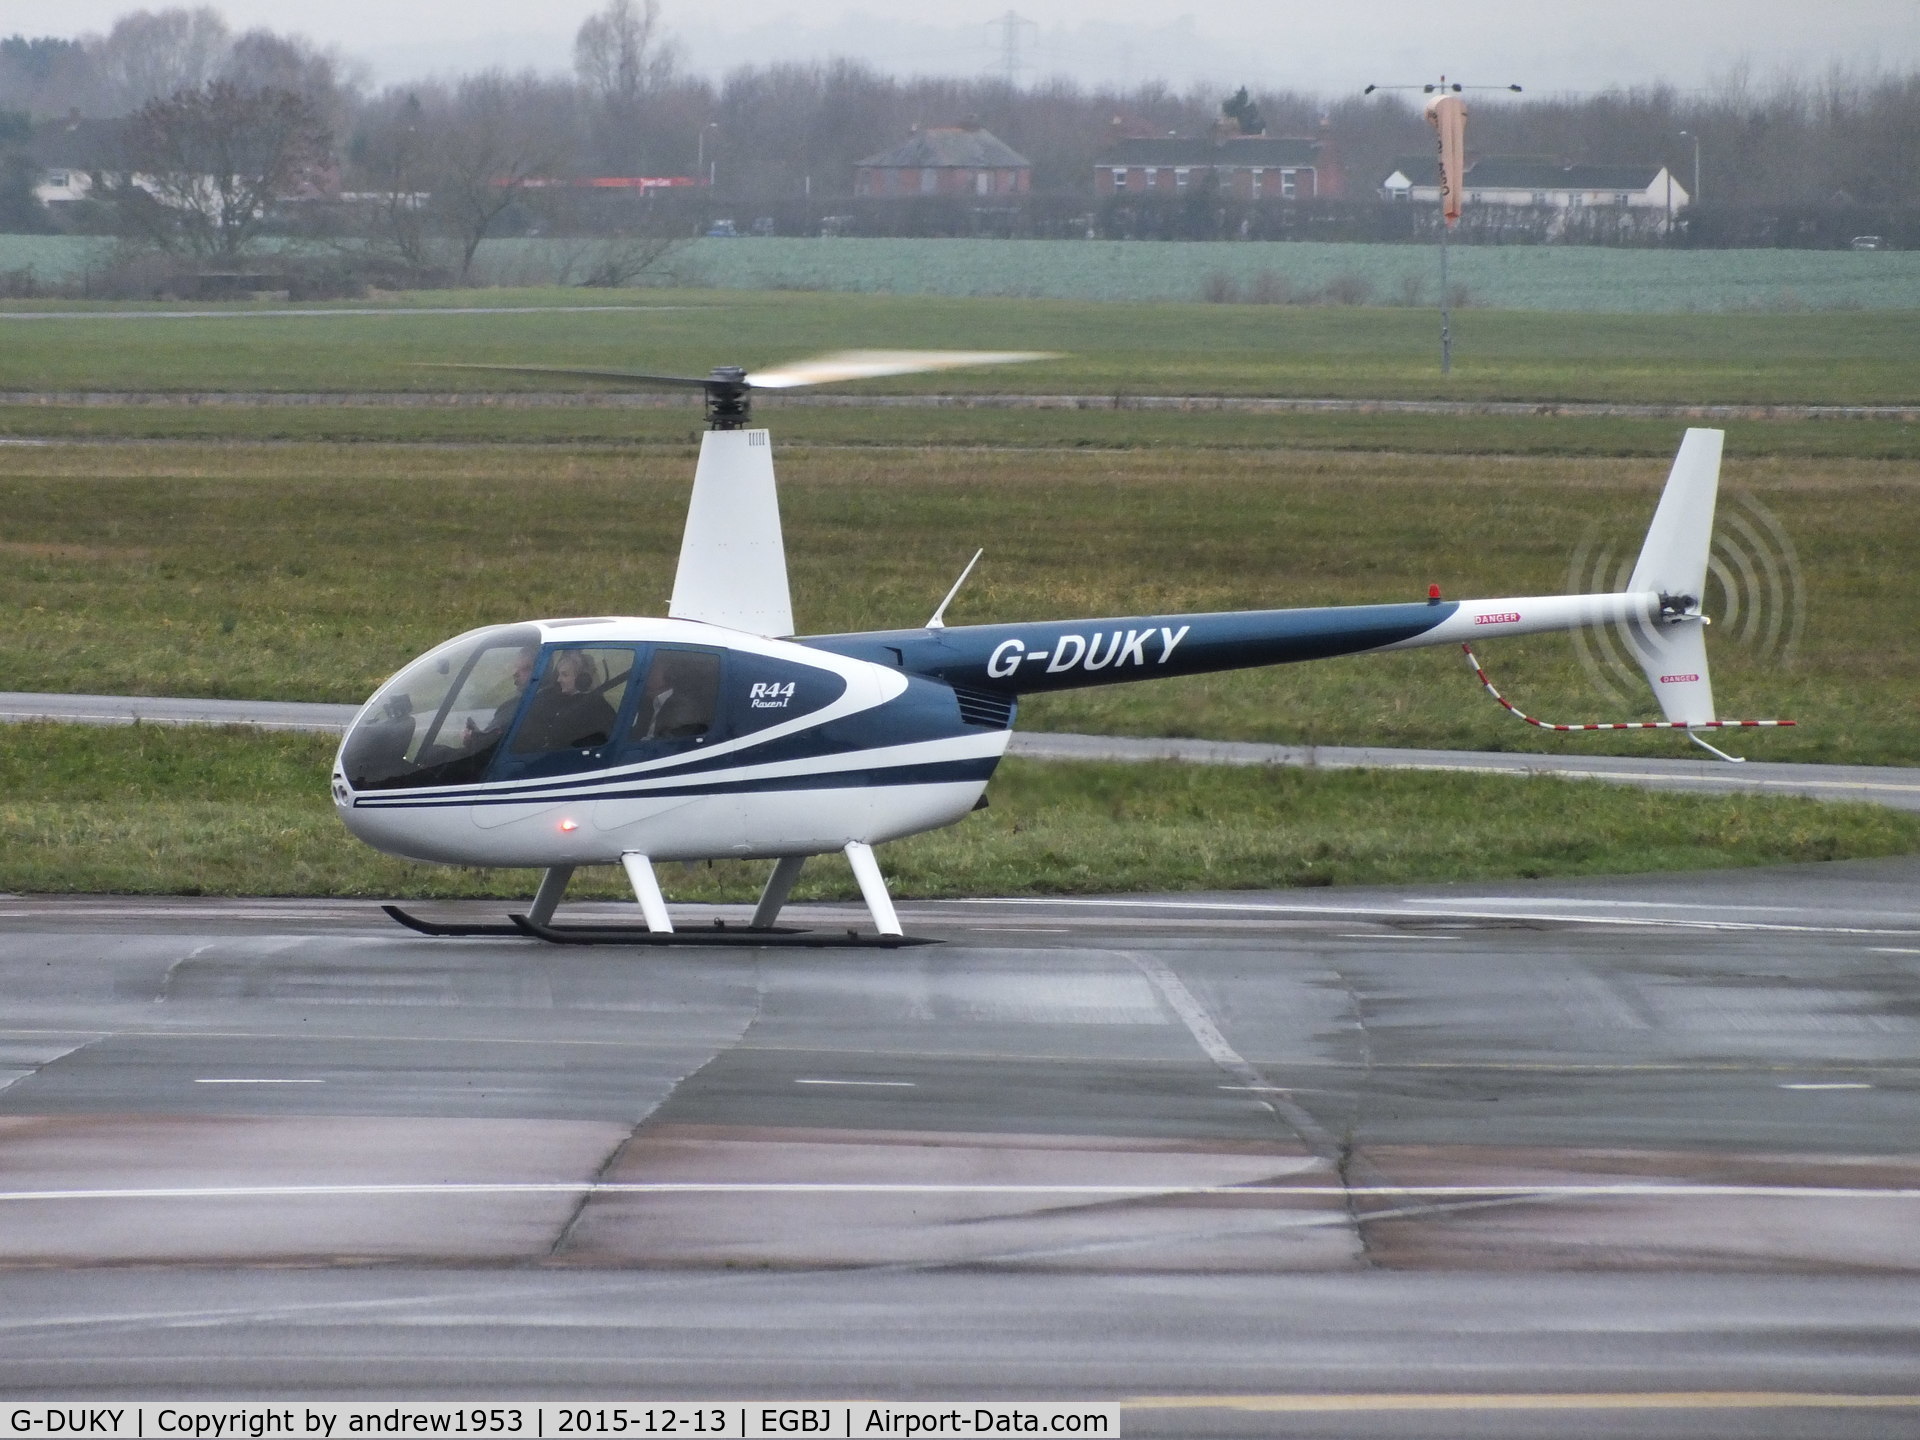 G-DUKY, 2005 Robinson R44 Raven C/N 1455, G-DUKY at Gloucestershire Airport.